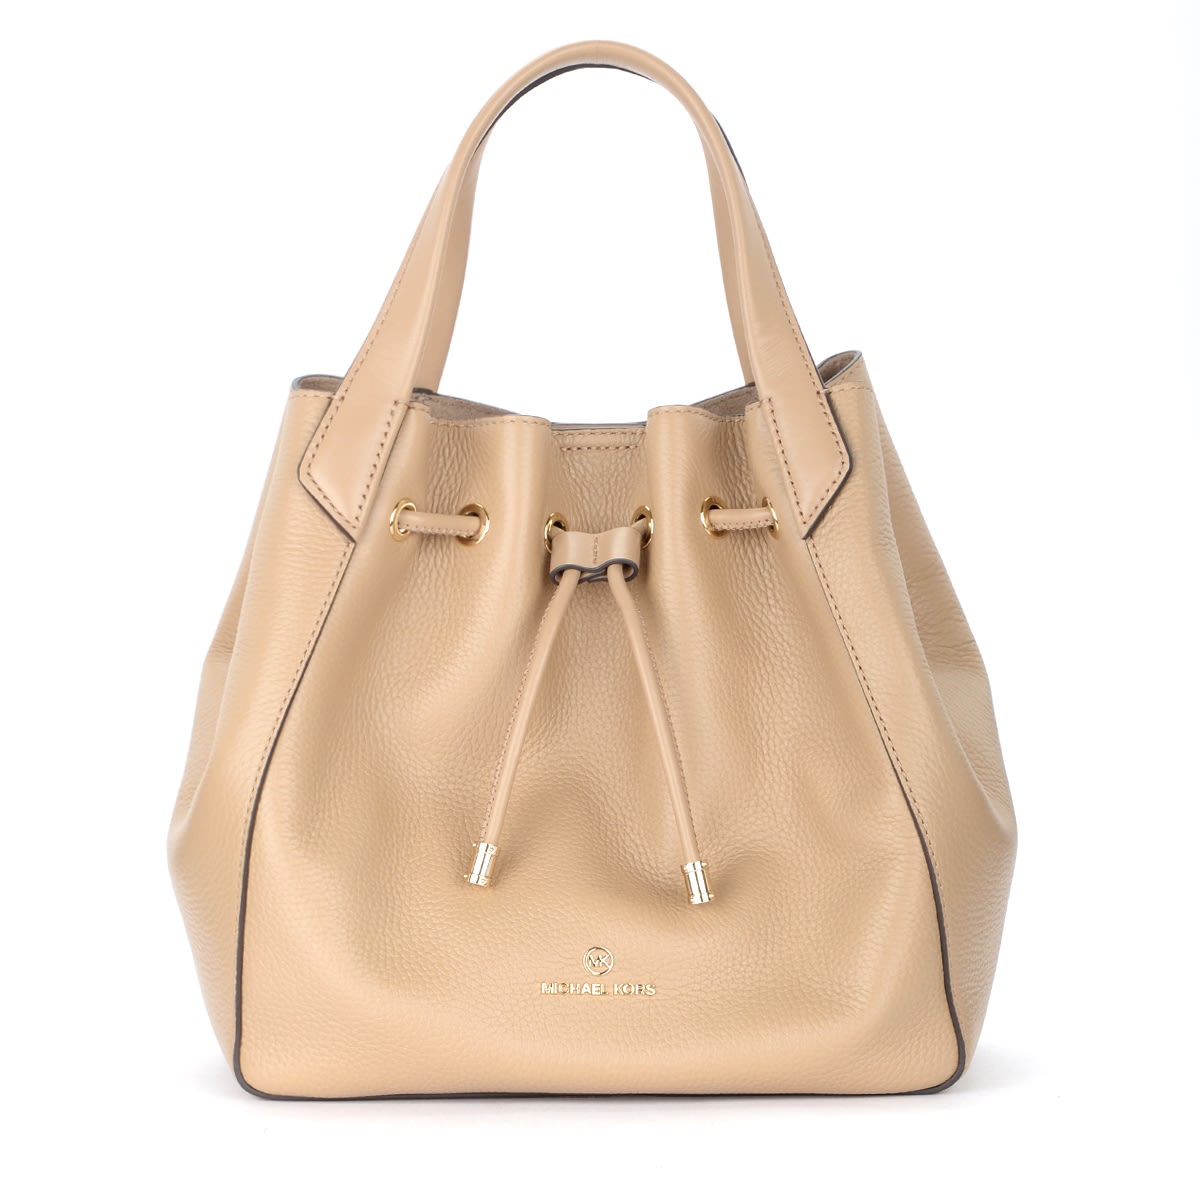 Michael Kors Phoebe Large Tote Bag In Camel Color Leather